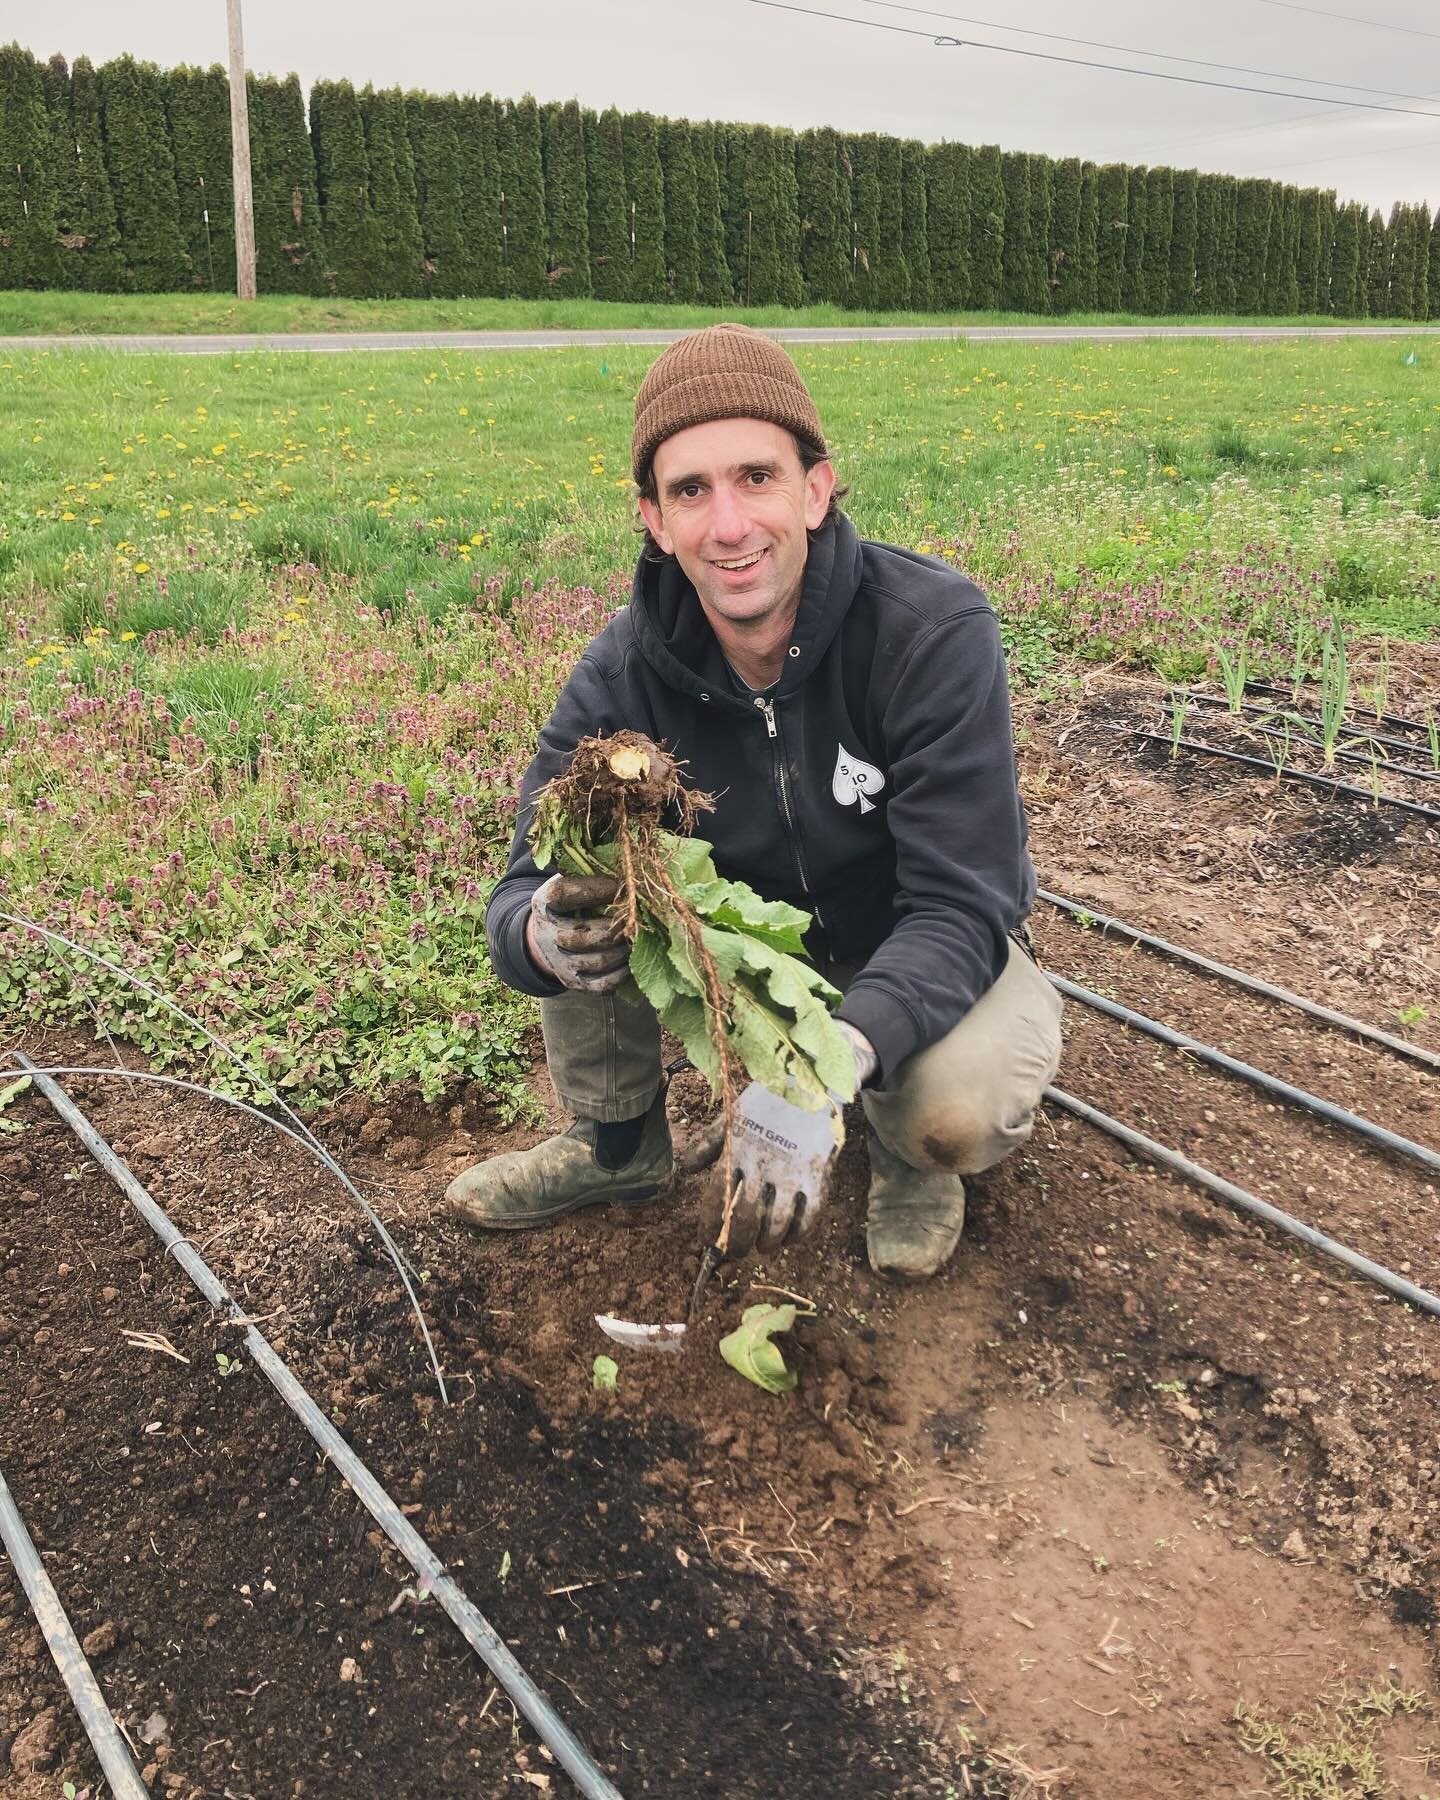 Meet Paul, our 2024 apprentice from Rogue Farm Corps! Paul brings a wealth of experience ranging from food service to metal fabrication. He&rsquo;s hit the ground running with us this past week at Thimbleberry, diving into everything from transplanti